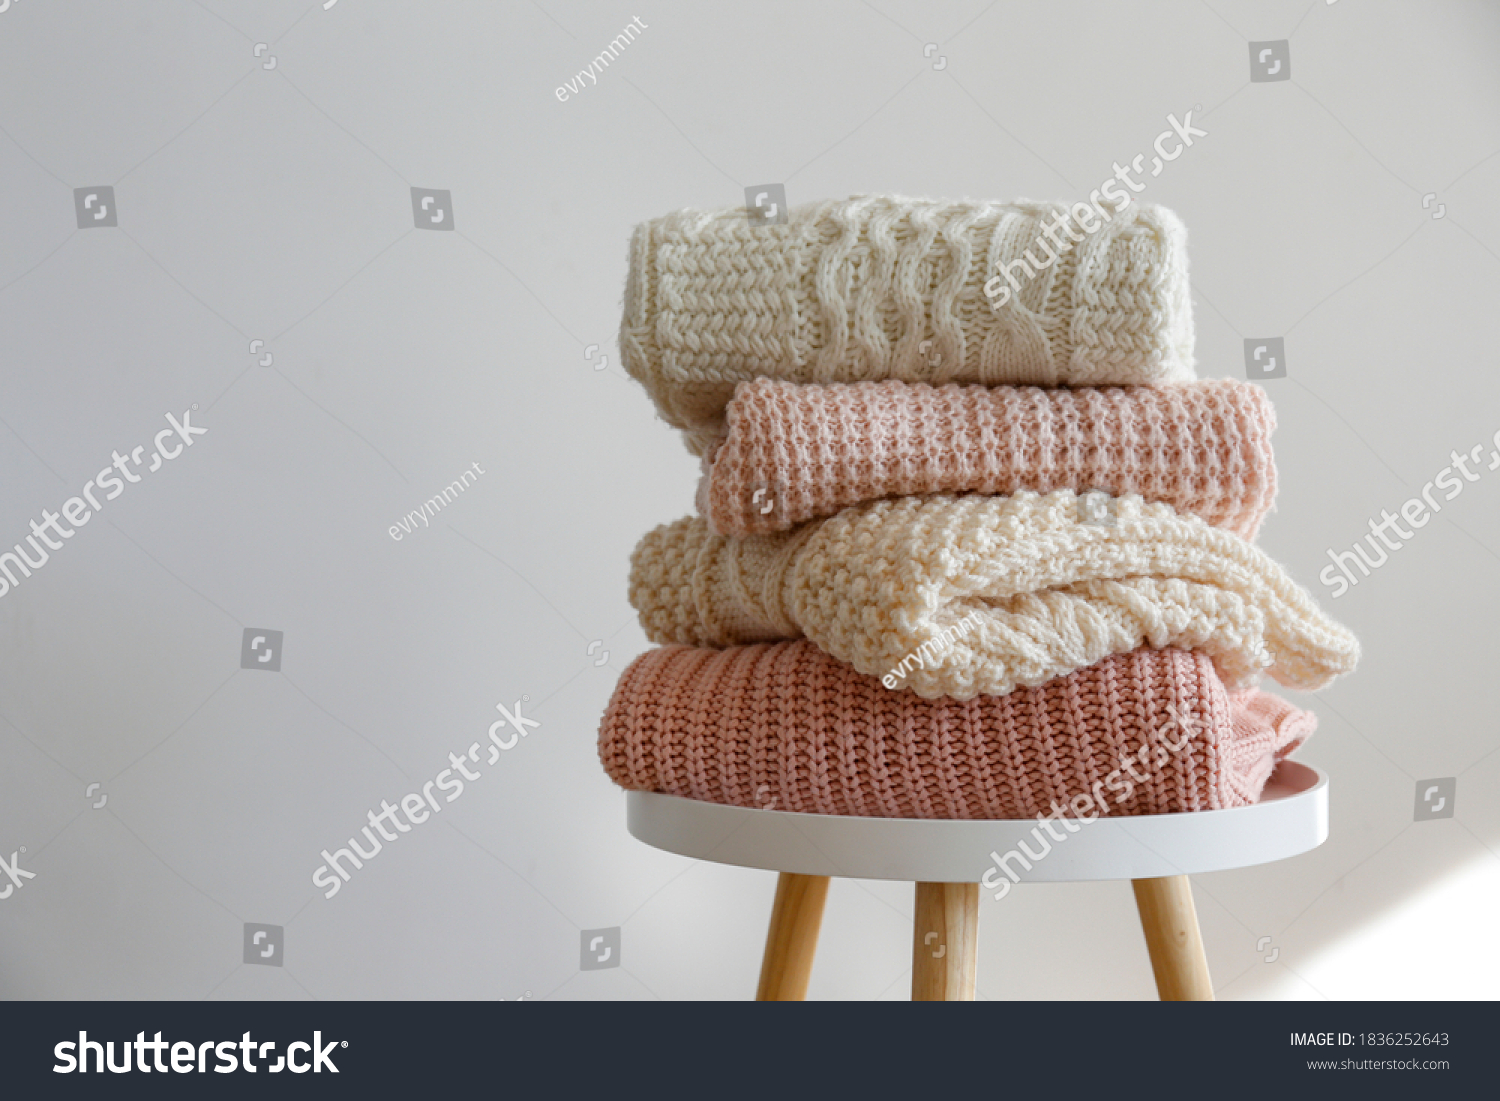 Stack of clean freshly laundered, neatly folded women's clothes on wooden table. Pile of shirts, dresses and sweaters on the table, white wall background. Copy space, close up, top view. #1836252643